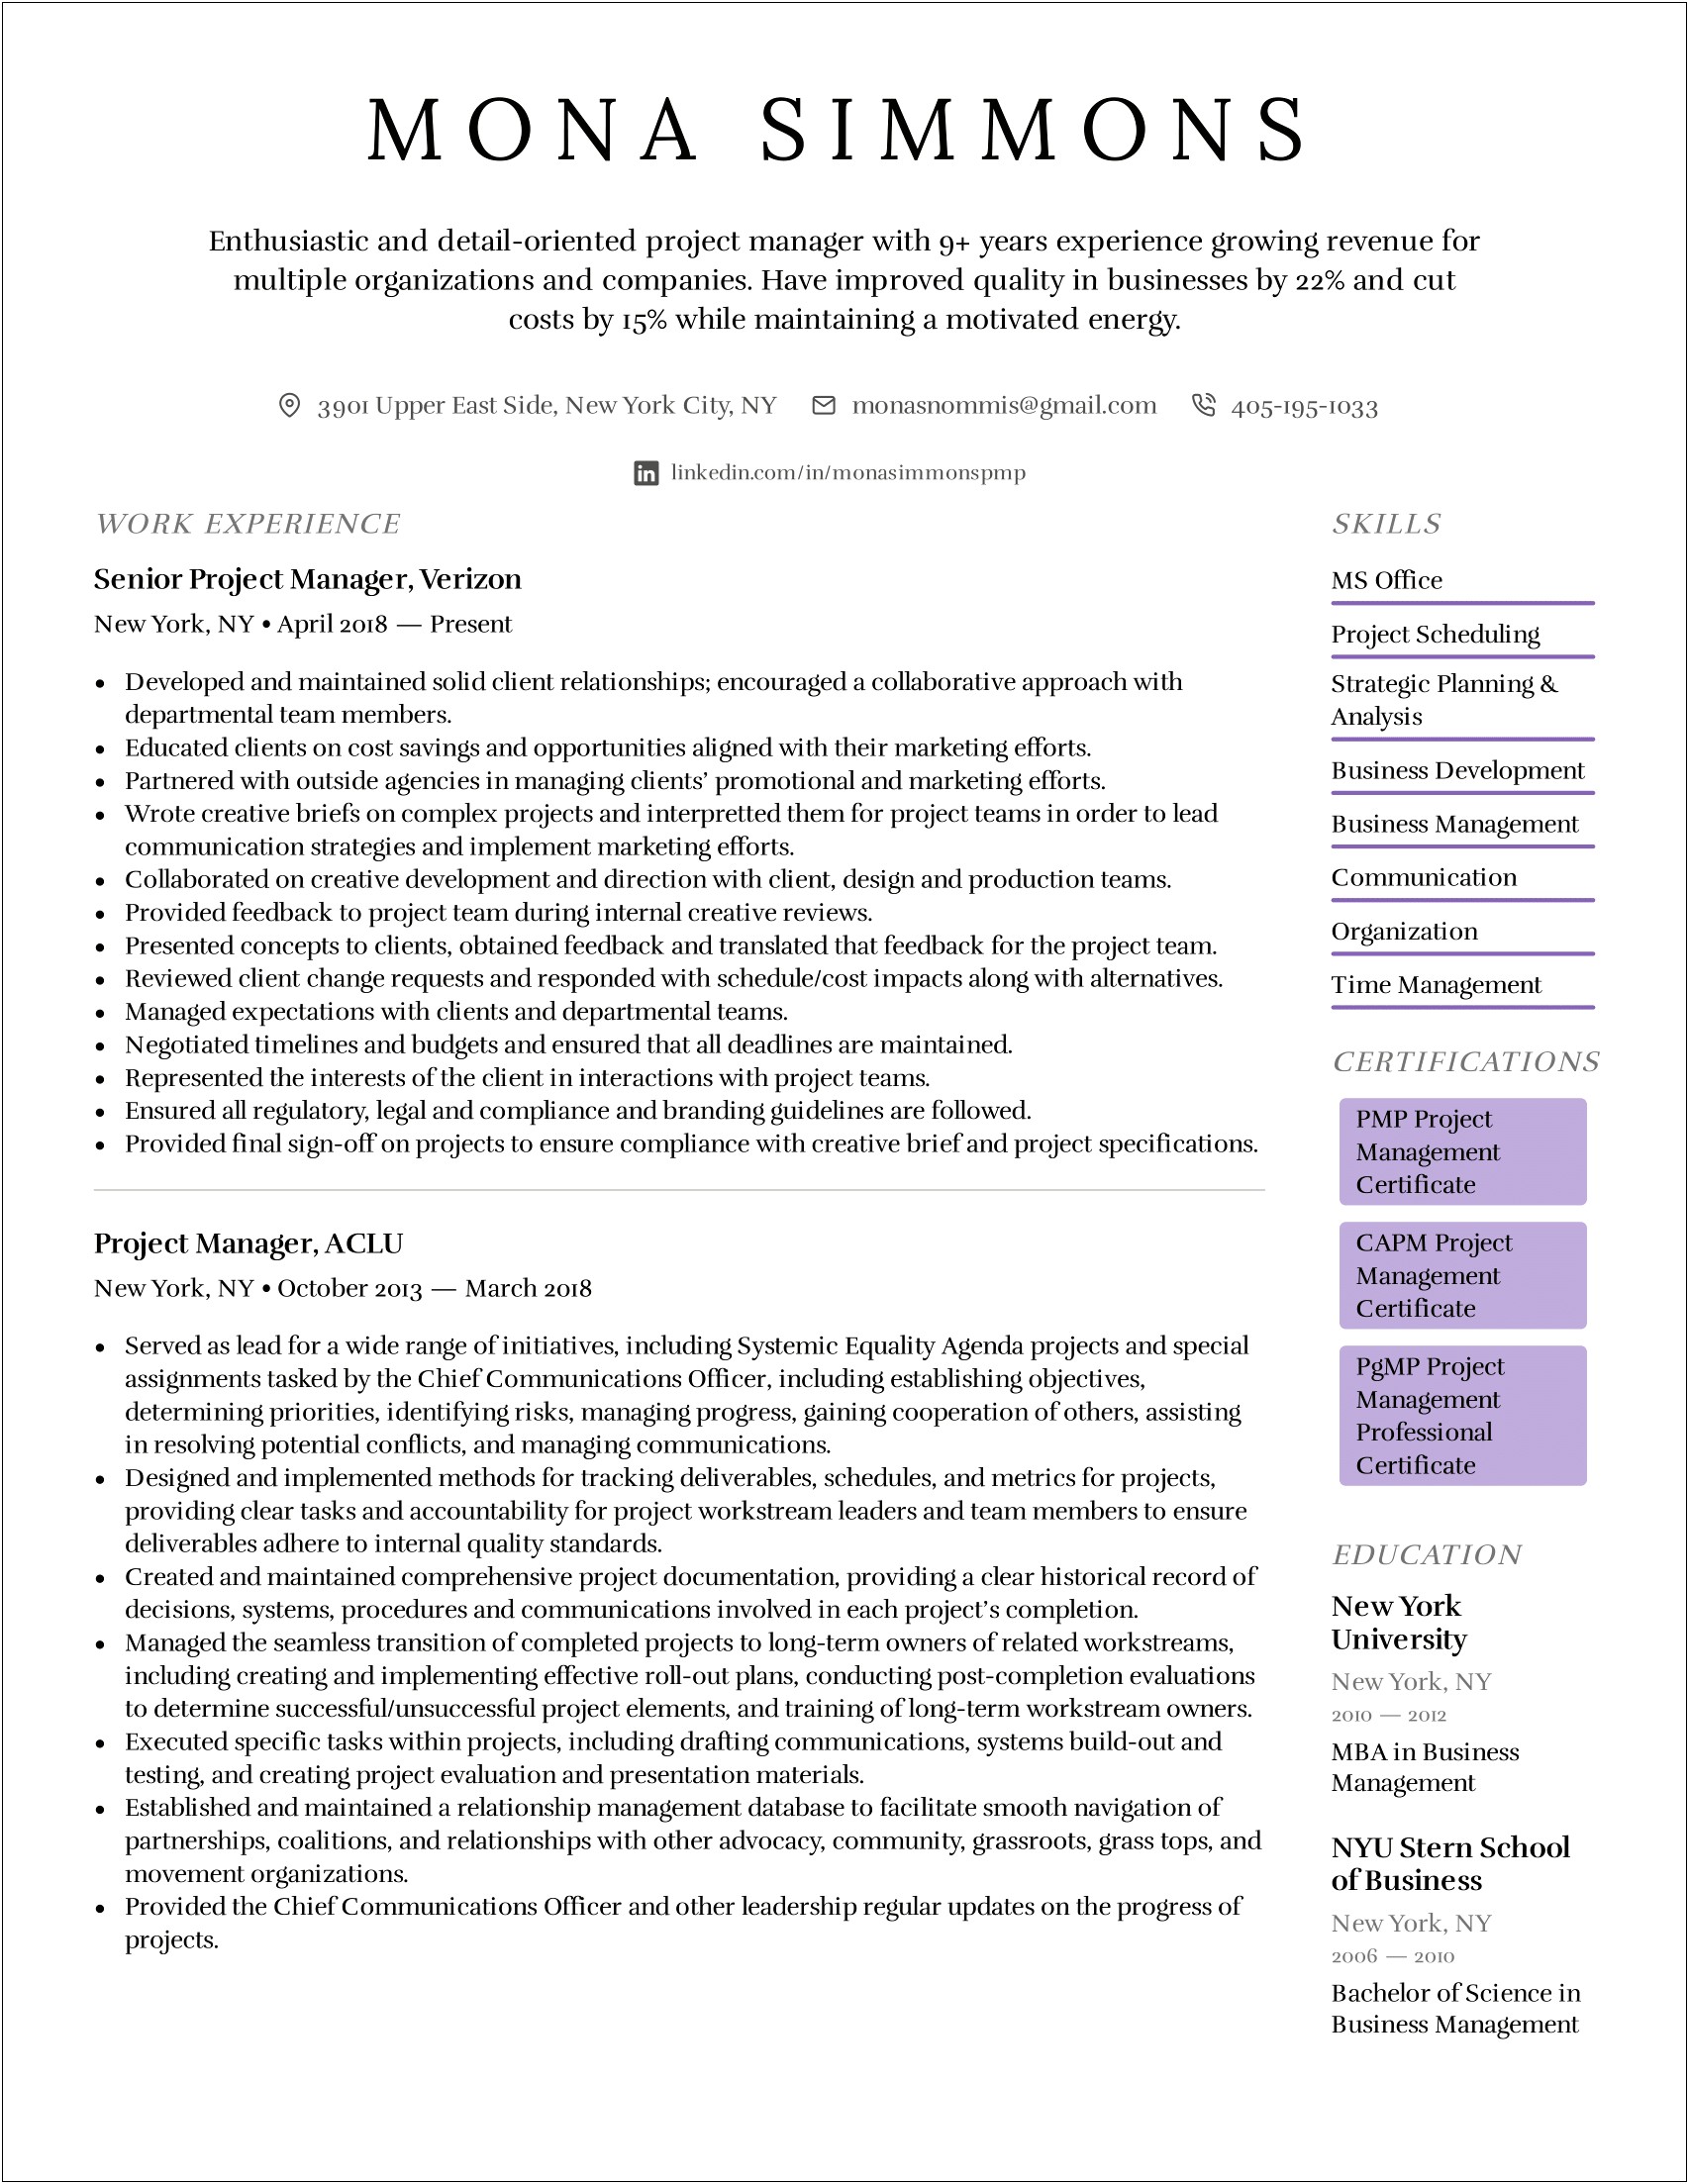 Project Management In Blurb In Resume